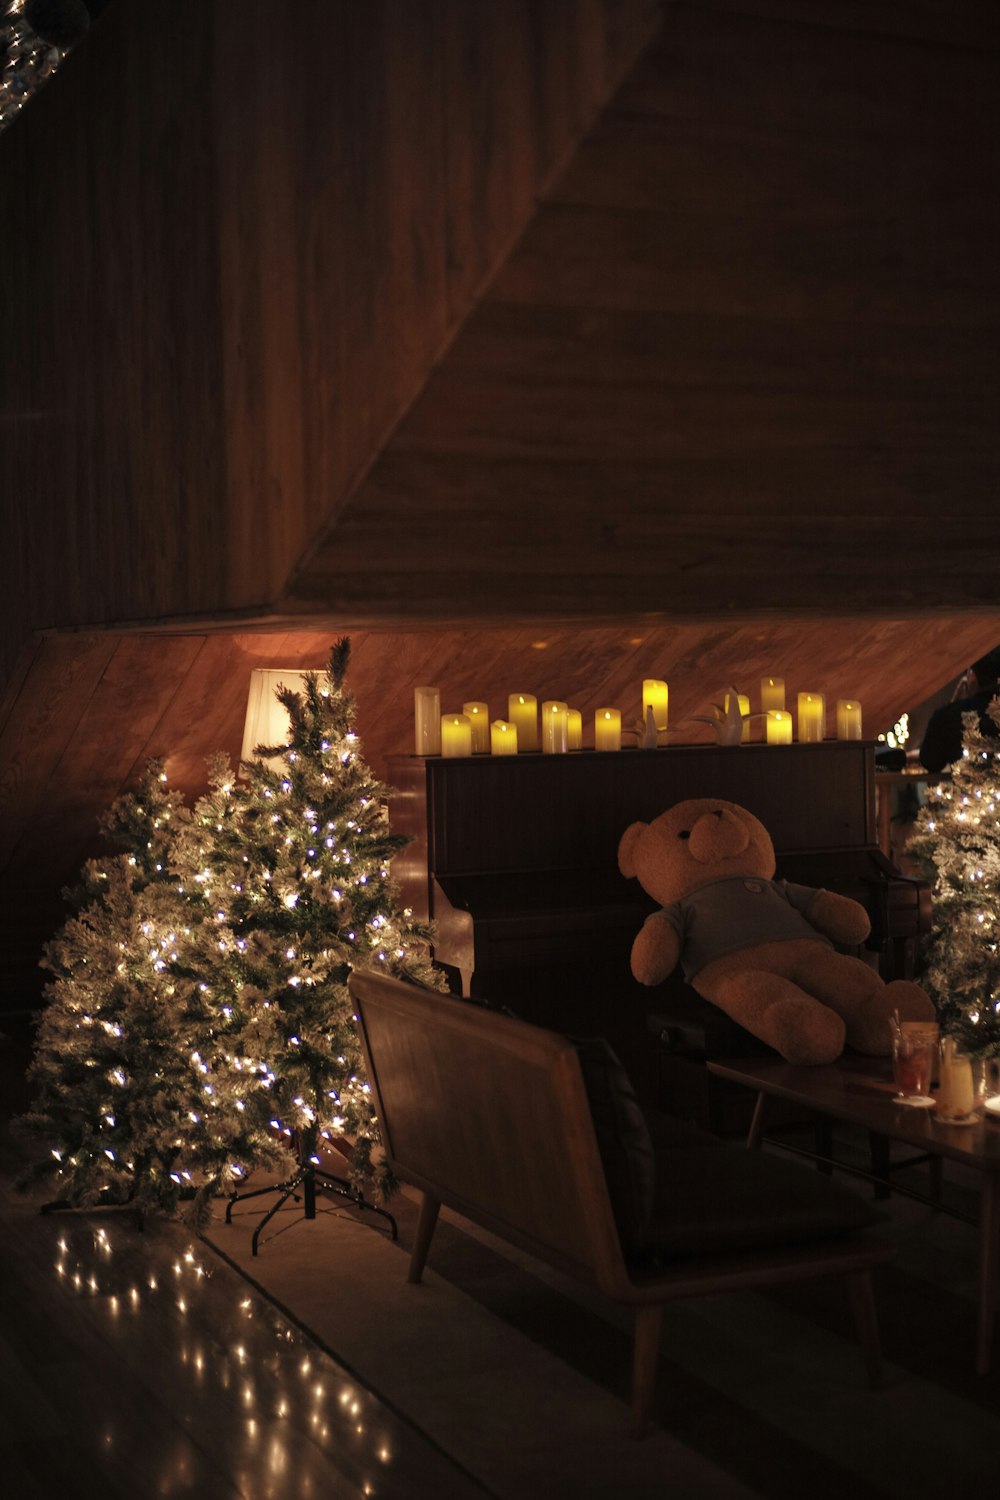 a teddy bear sitting in a chair next to a christmas tree